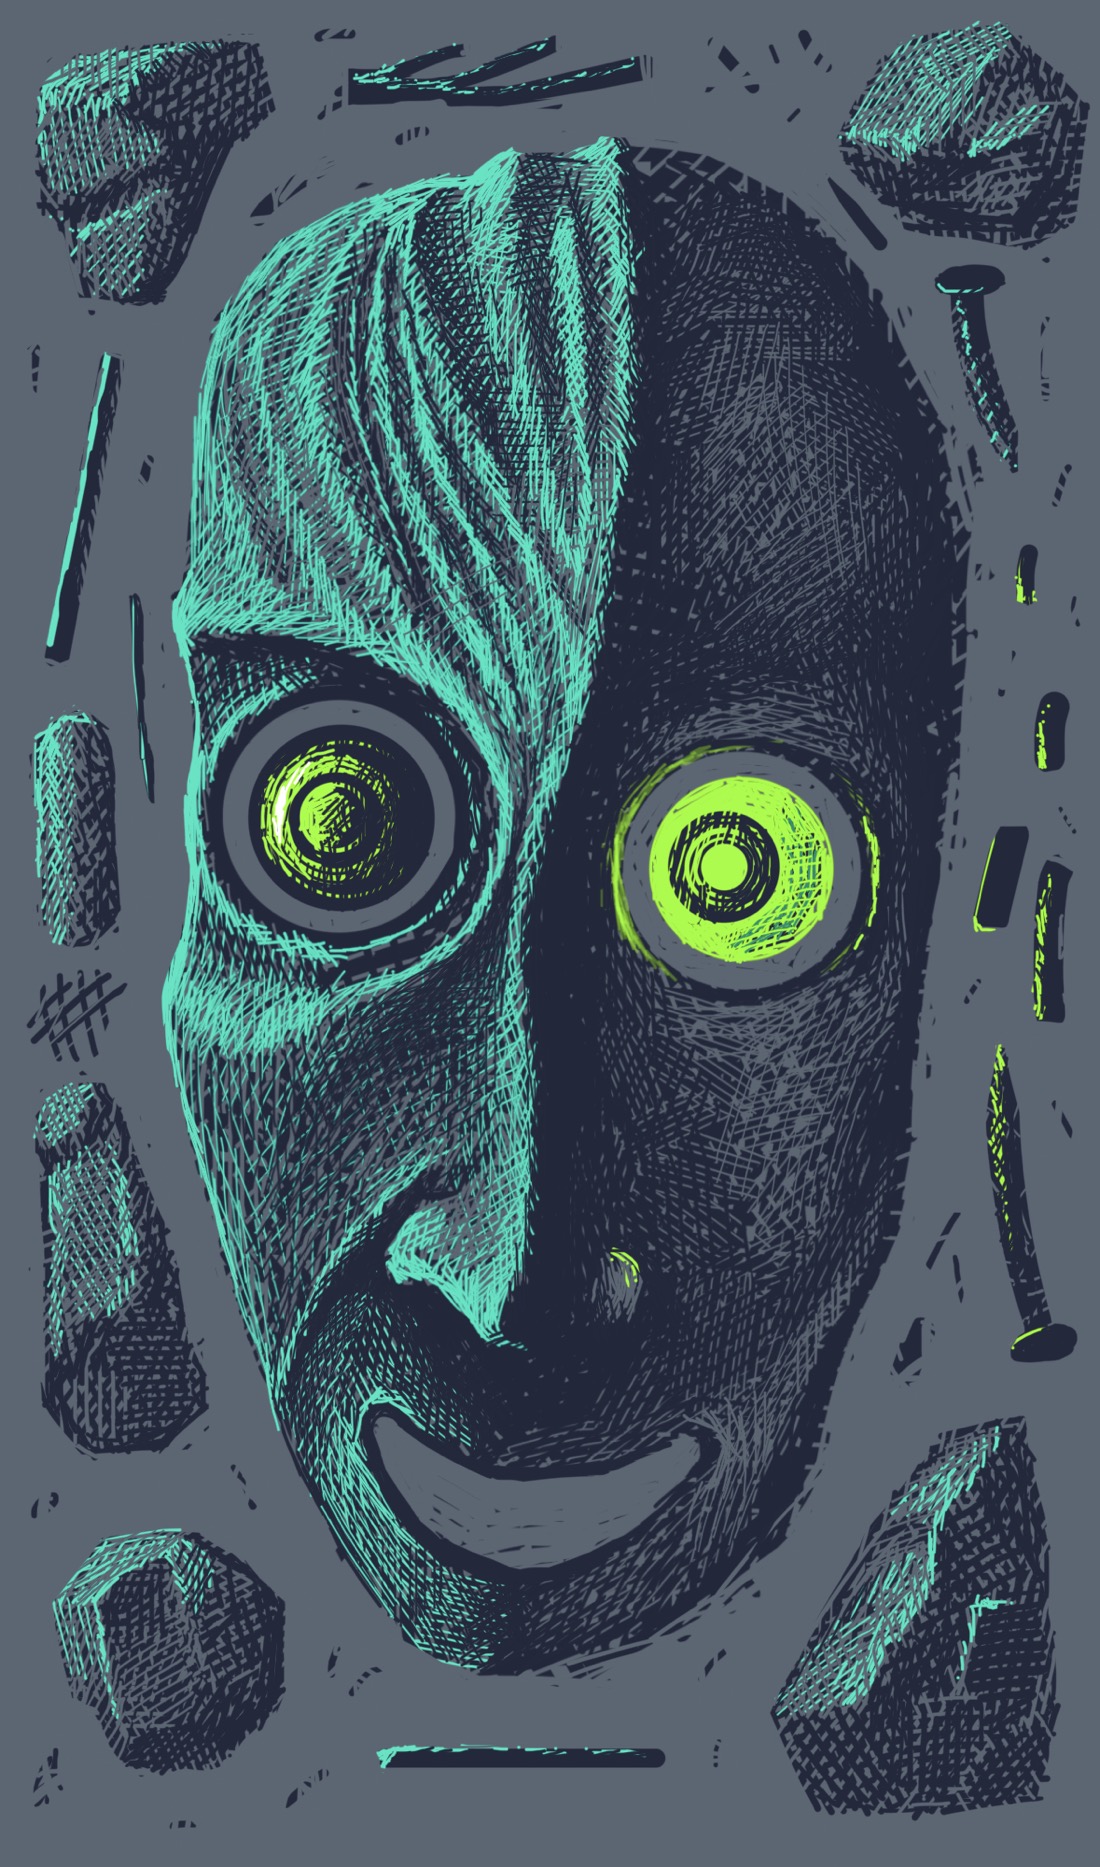 A mask with glowing green eyes and an unsettling smile, surrounded by bits of debris and rocks. The mask is illuminated by an iridescent greenish light, the source unseen. The light is also reflecting off the rocks and debris.